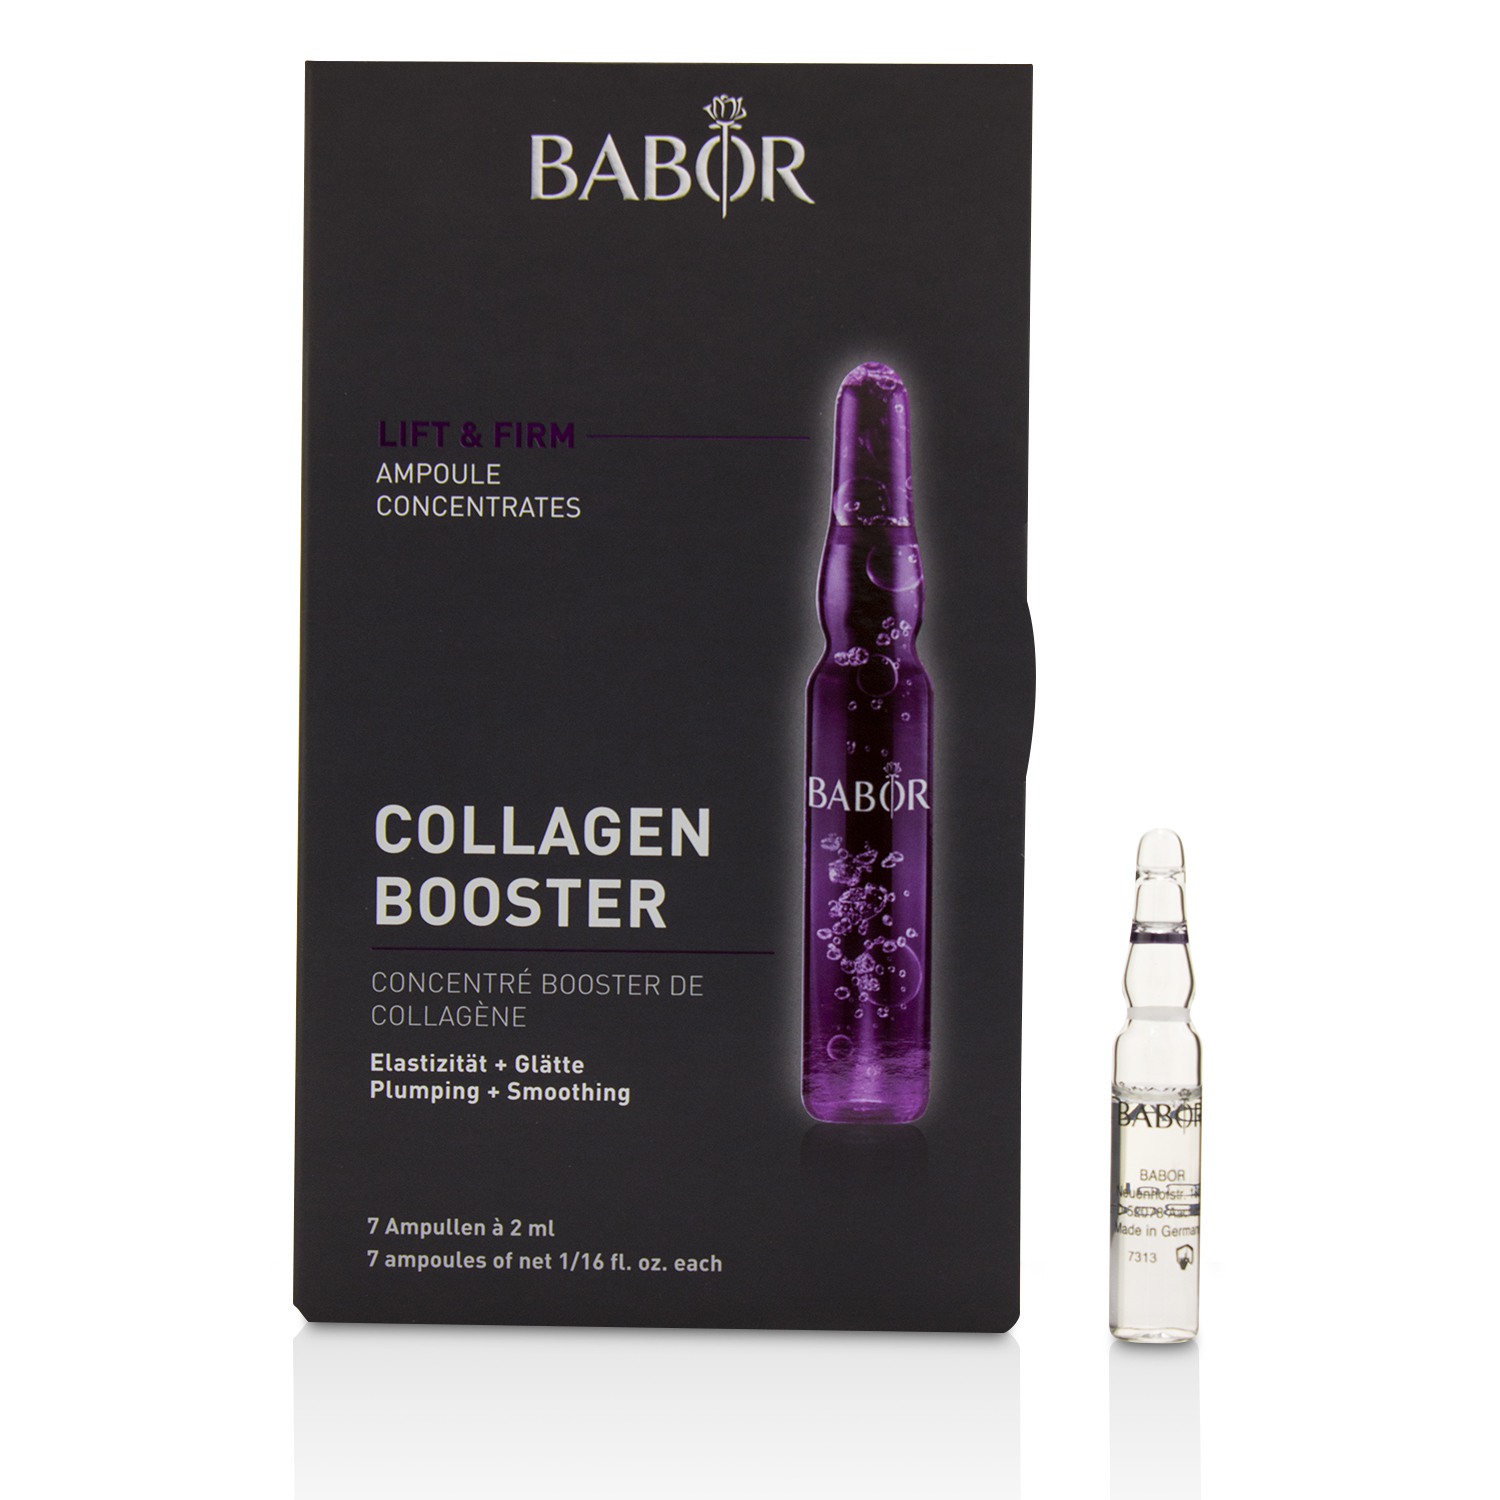 Ampoule Concentrates Lift & Firm Collagen Booster Babor Image